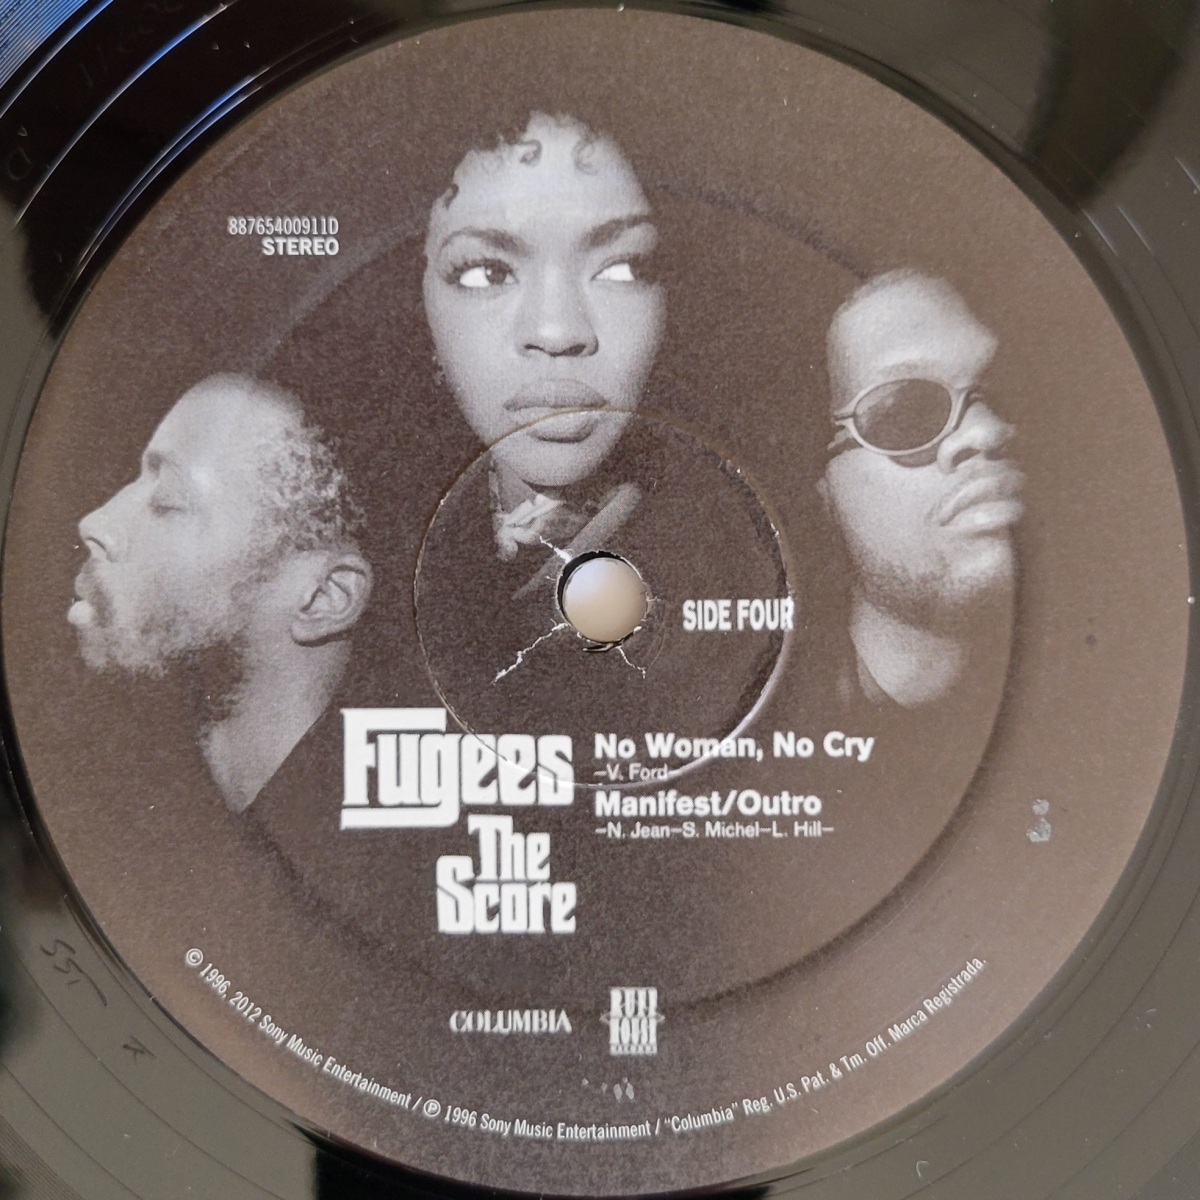 fugees record label